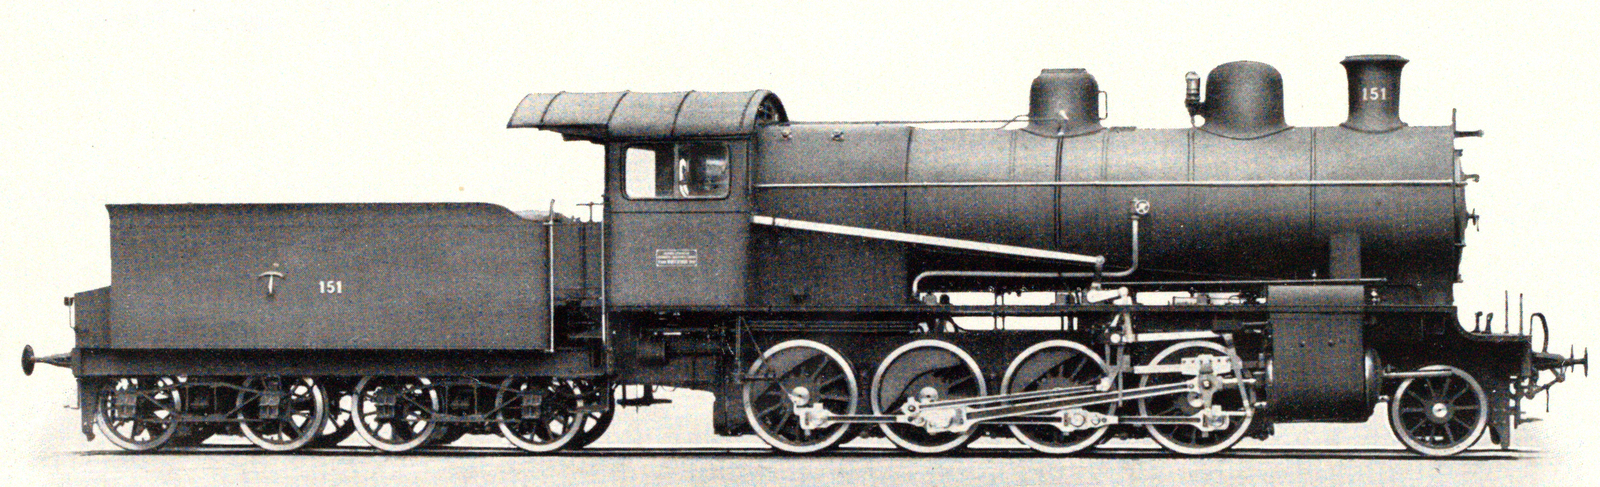 28a No. 151 in the SLM type sheet